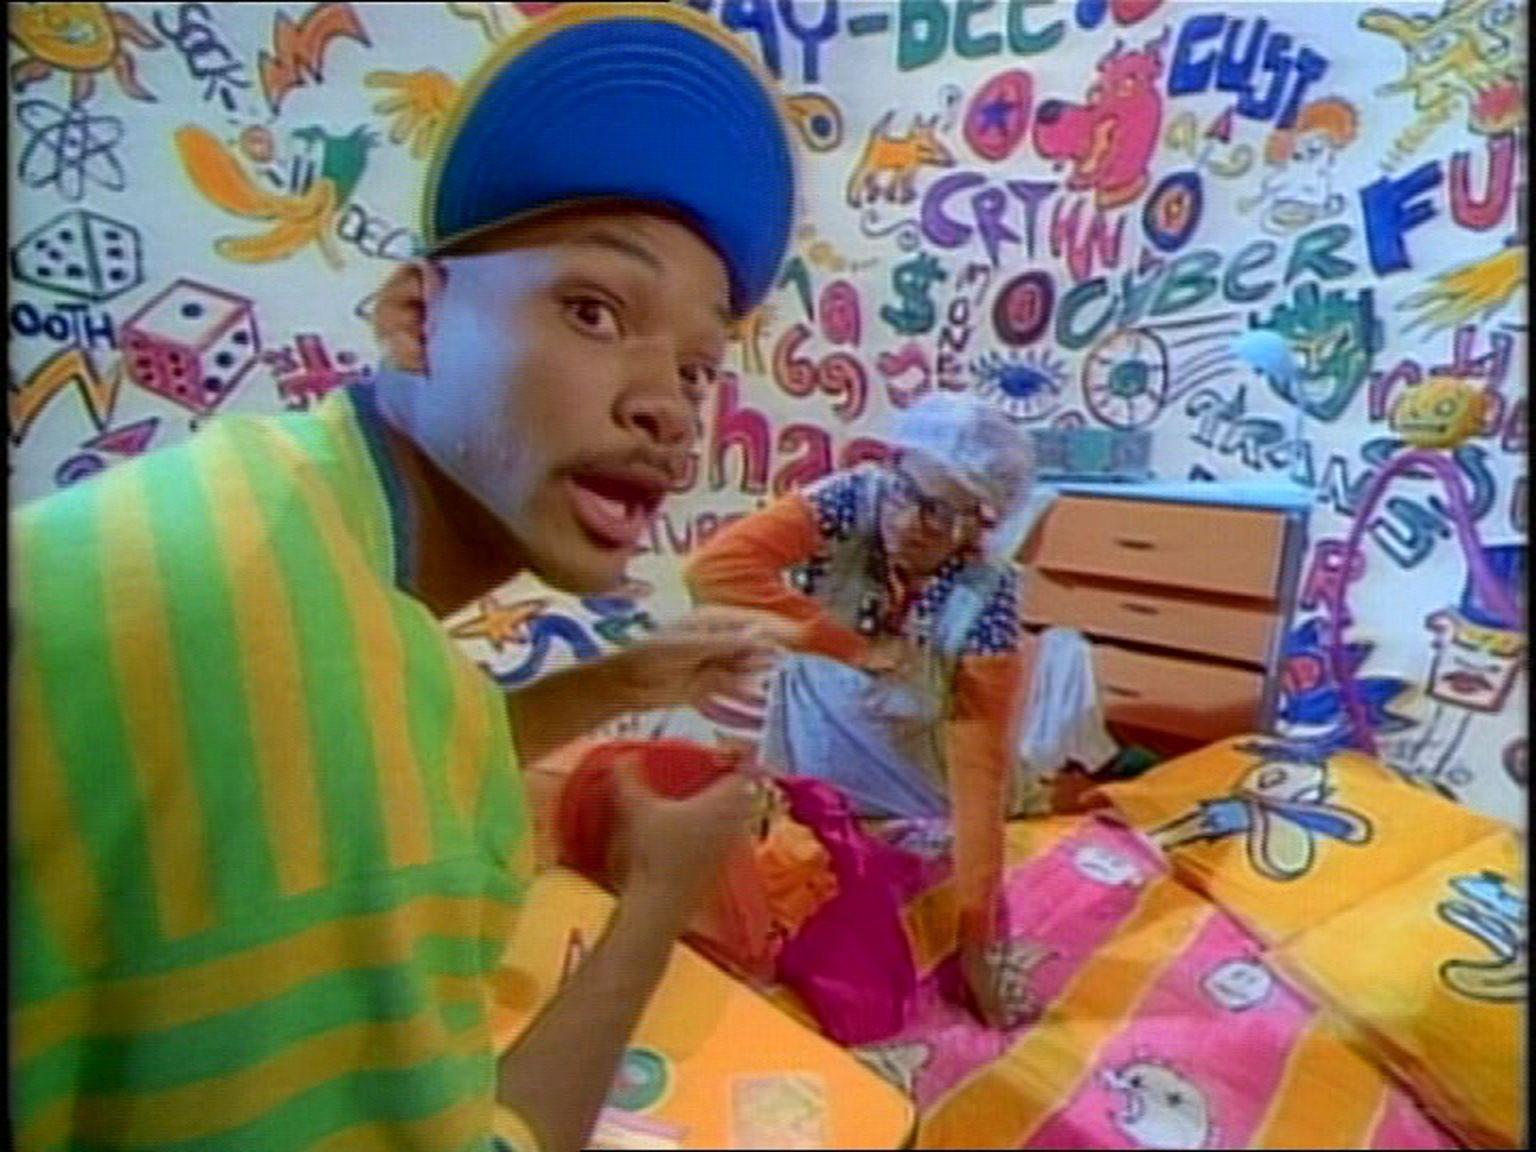 fresh prince of bel air Comedy Sitcom Series Television Will Smith  Fresh Prince Bel Air 